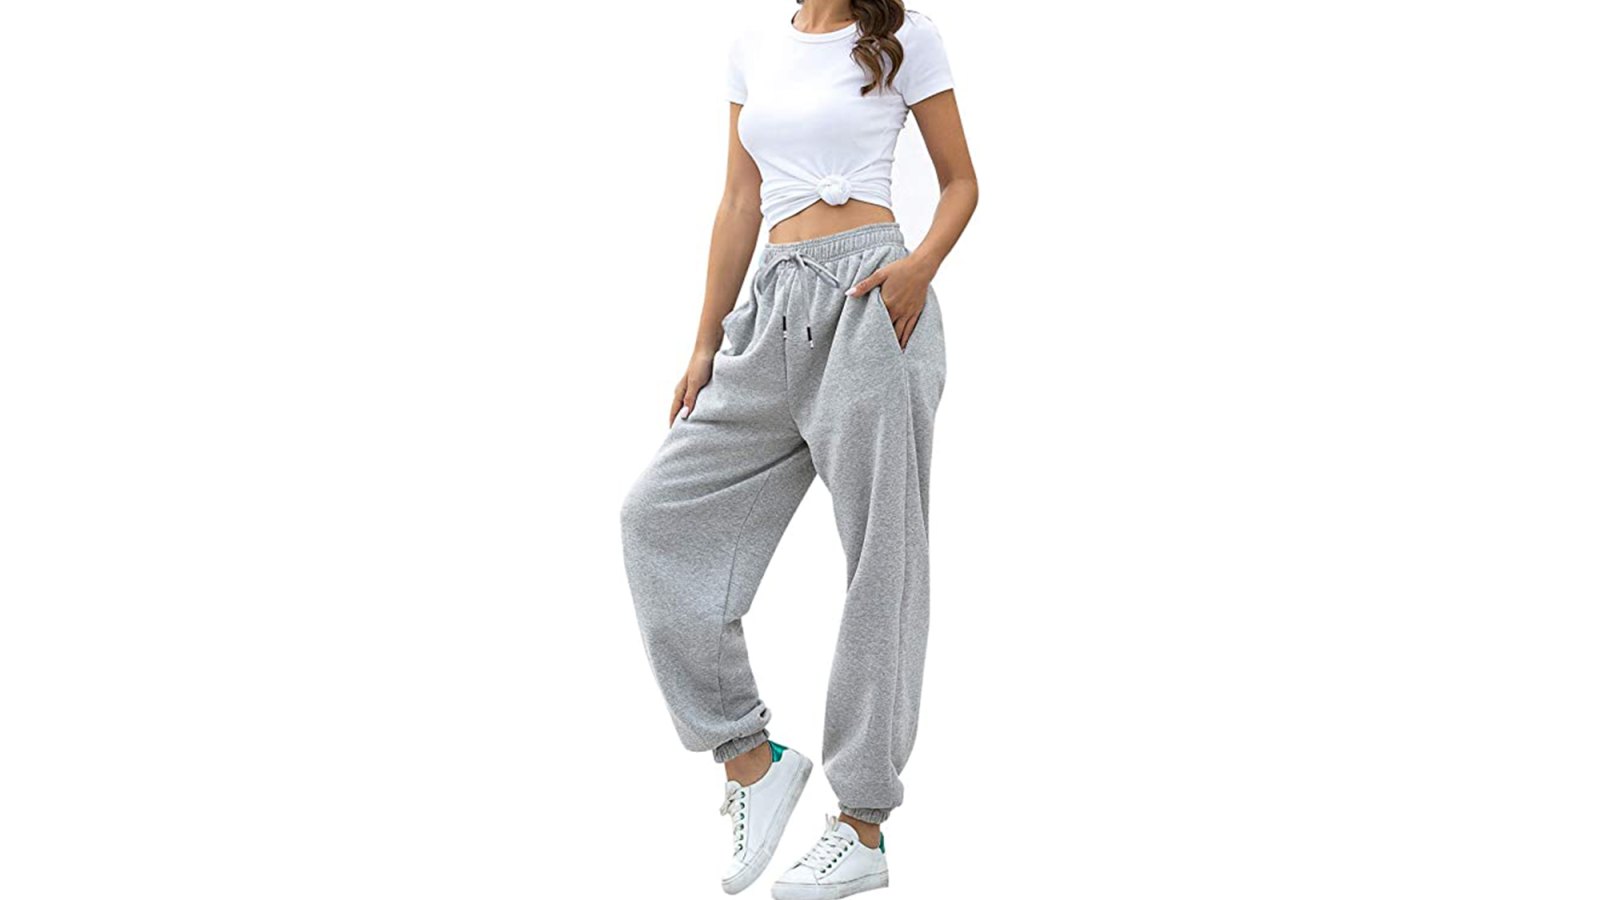 Vinmen Baggy Sweatpants Are on Sale for Up to 40% Off